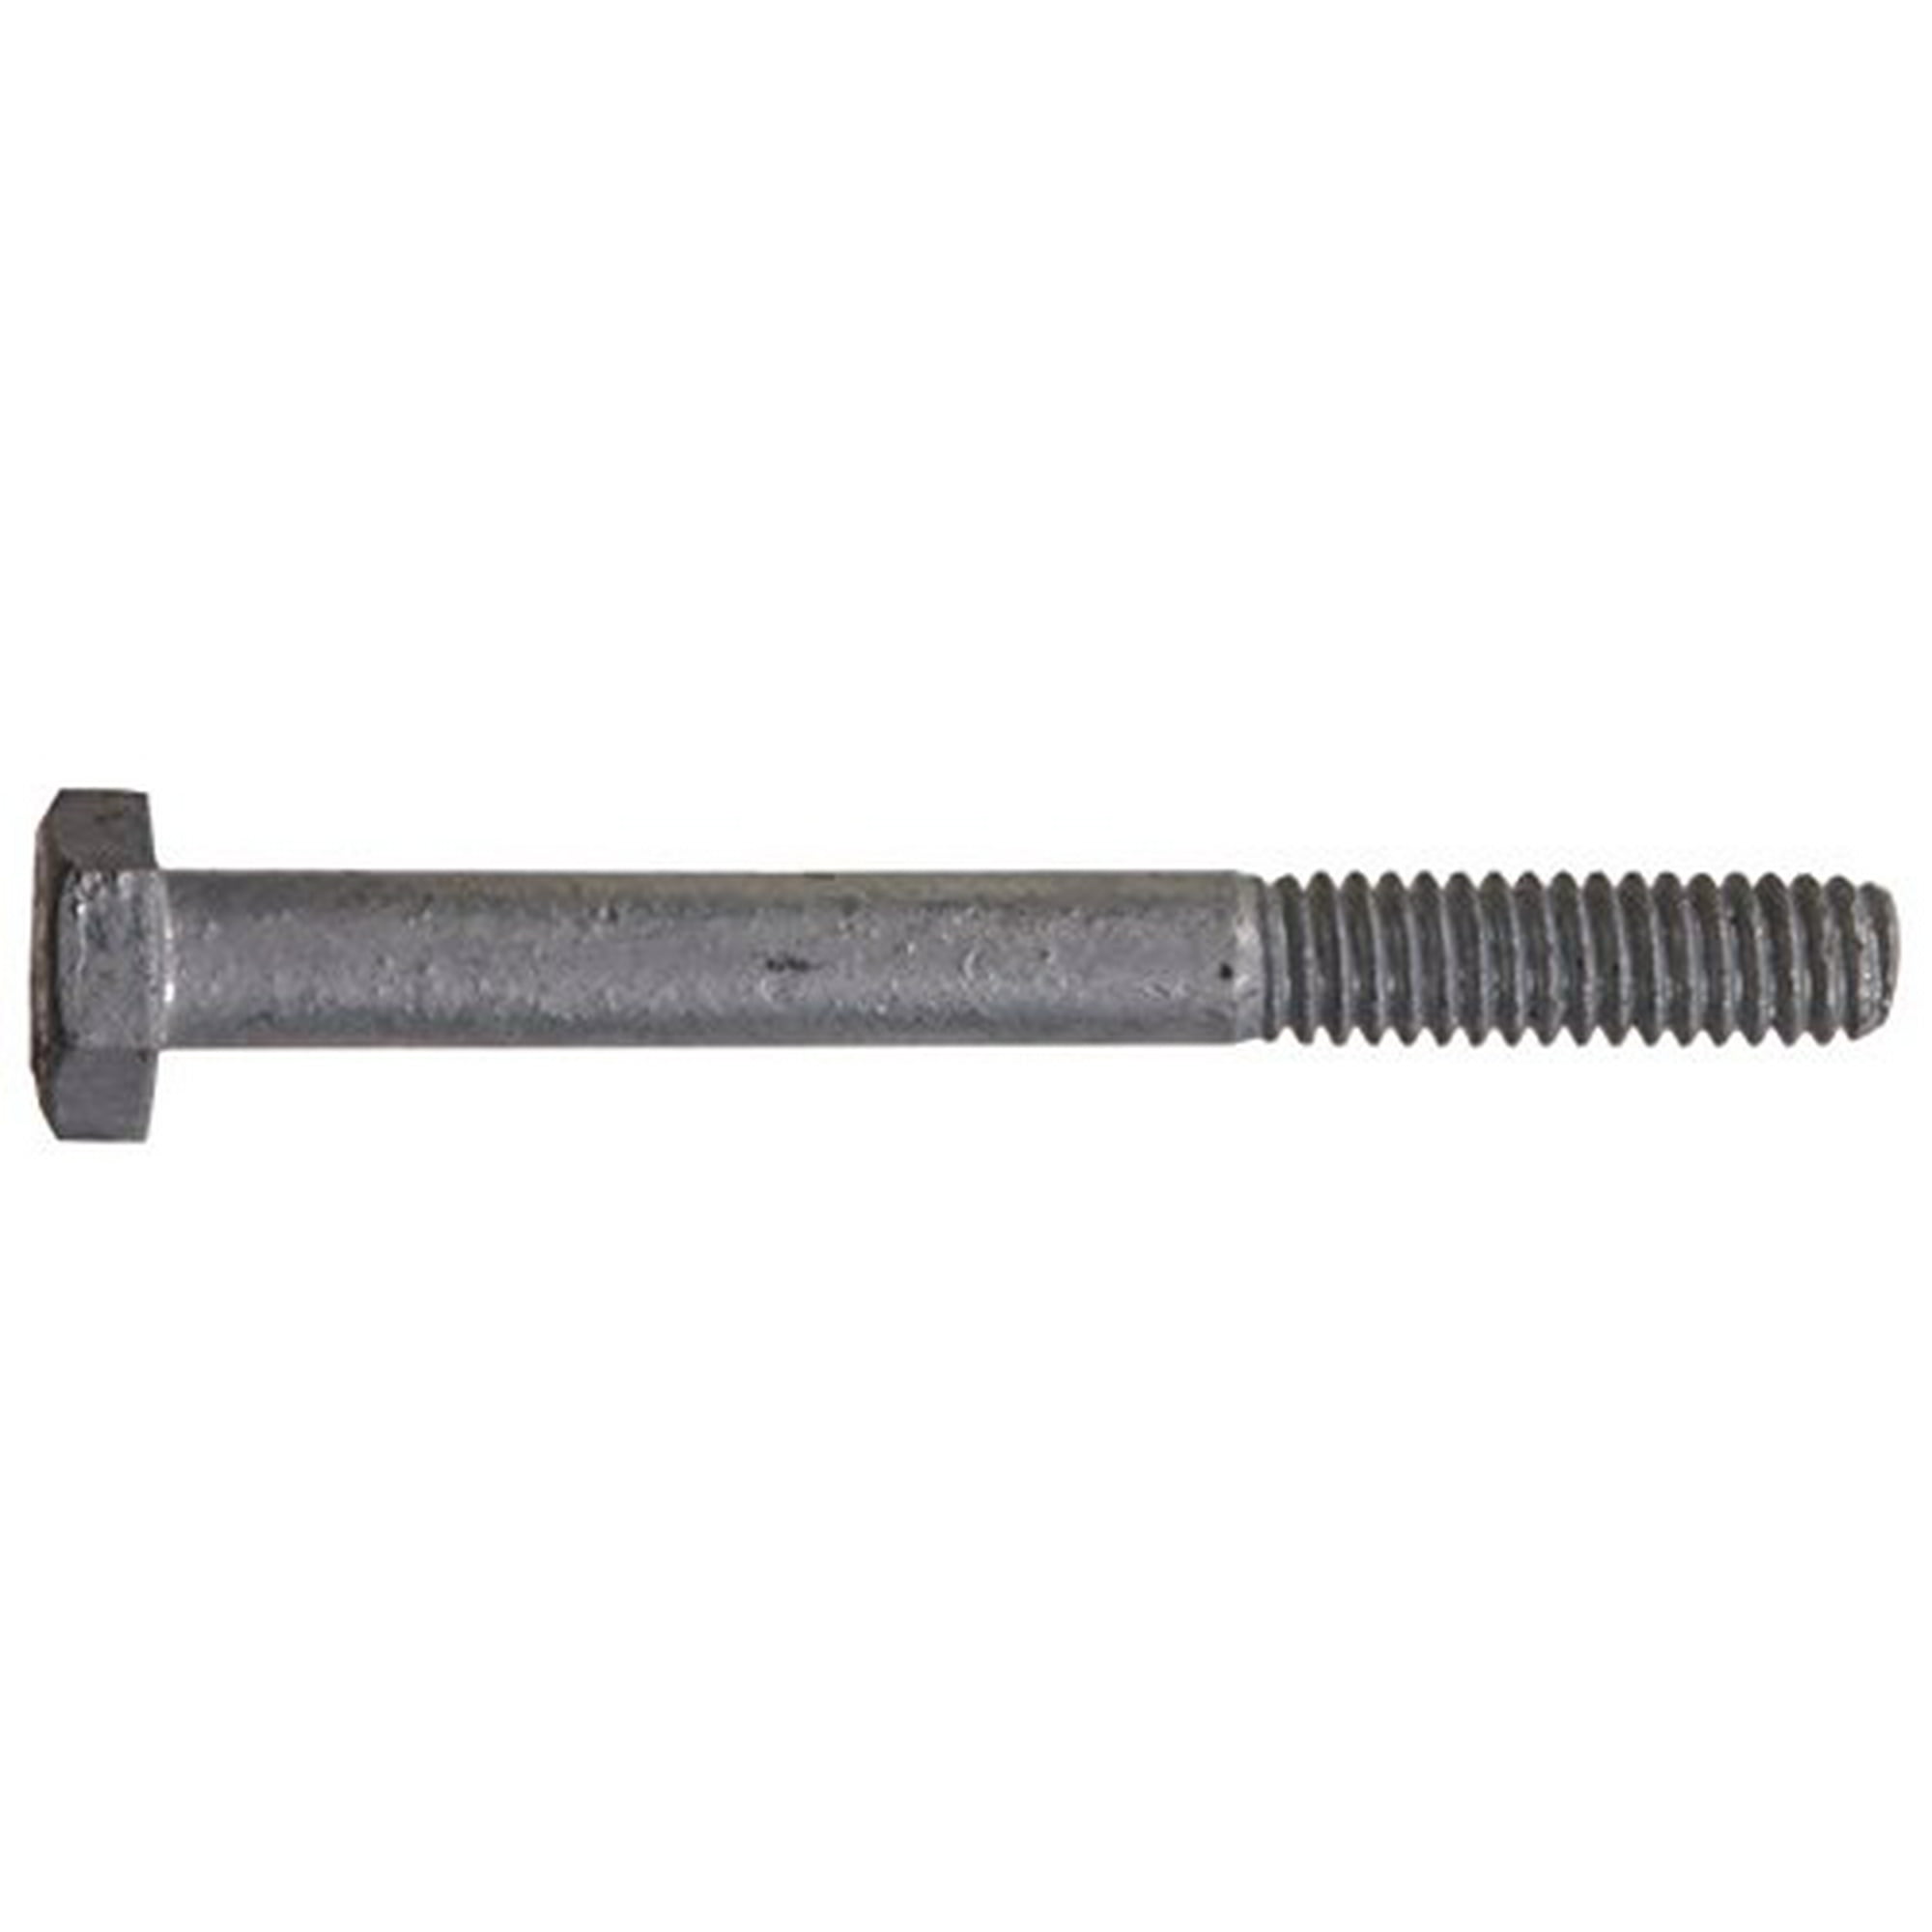 25-Pack The Hillman Group 811650 Hot Dipped Galvanized Hex Bolt 5/8-Inch x 1-Inch 